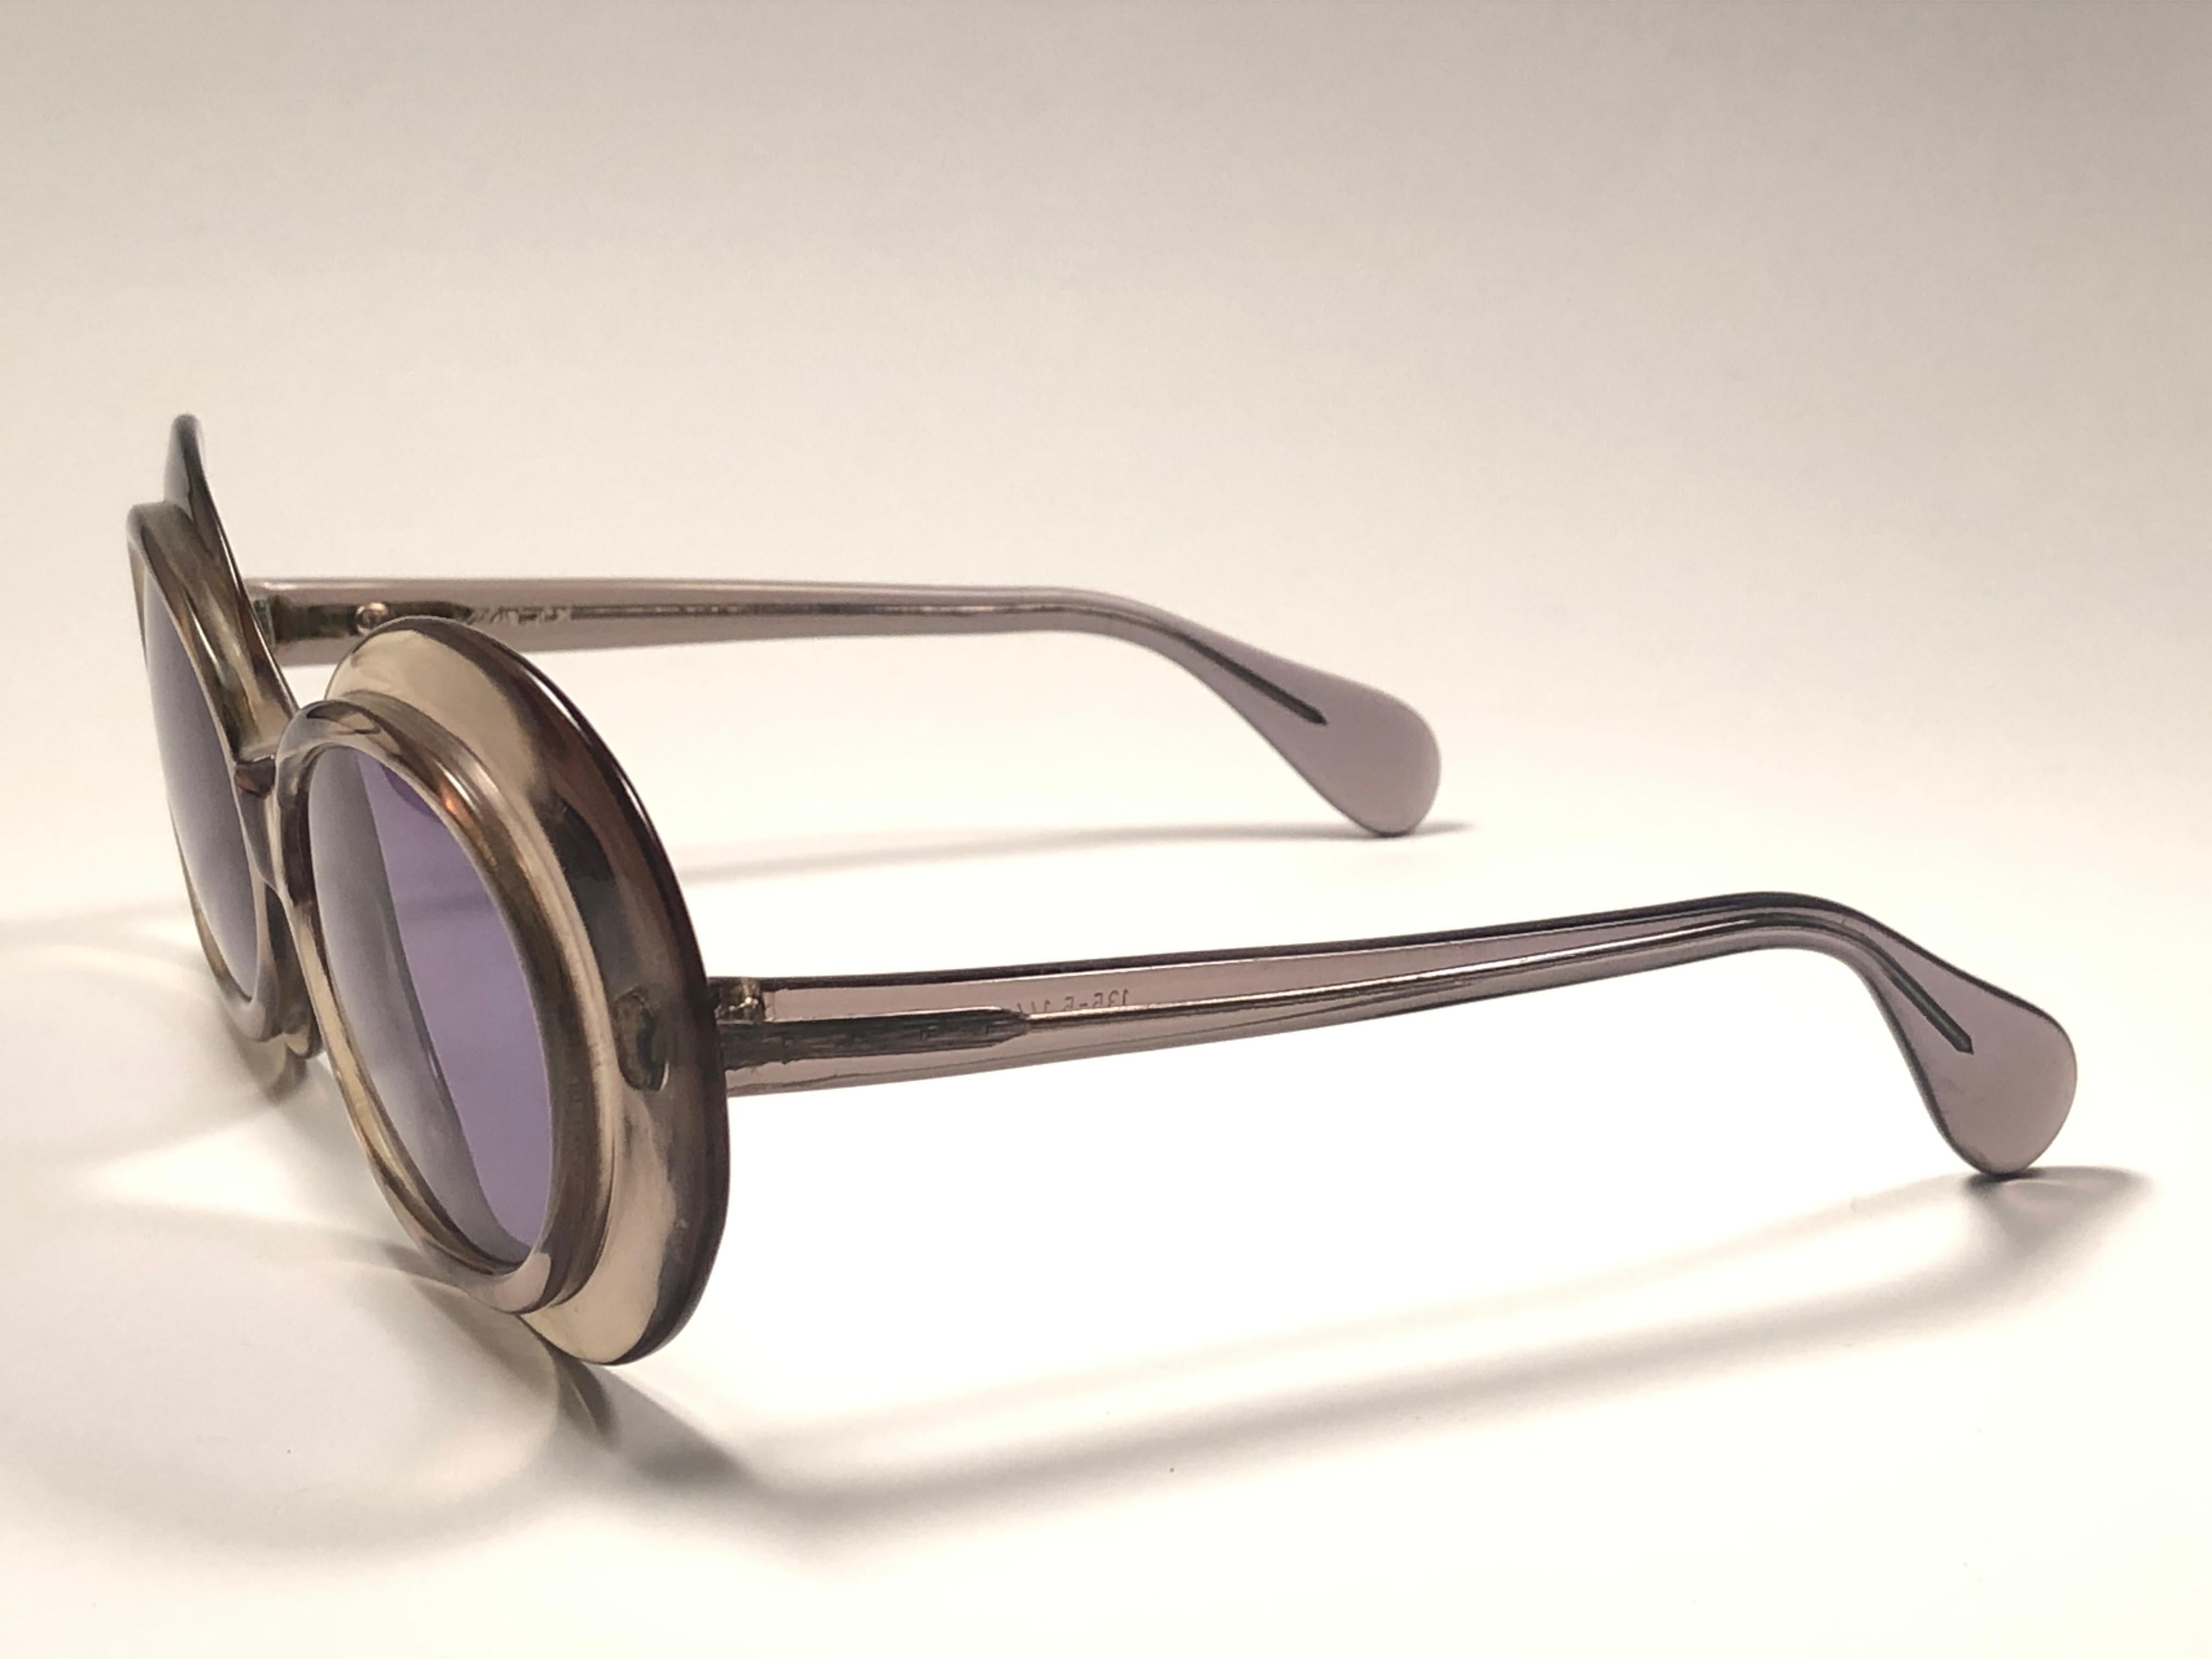 Vintage Serge Kirchhofer Mod 86 Oversized Sunglasses Austria 1970 In Good Condition For Sale In Baleares, Baleares